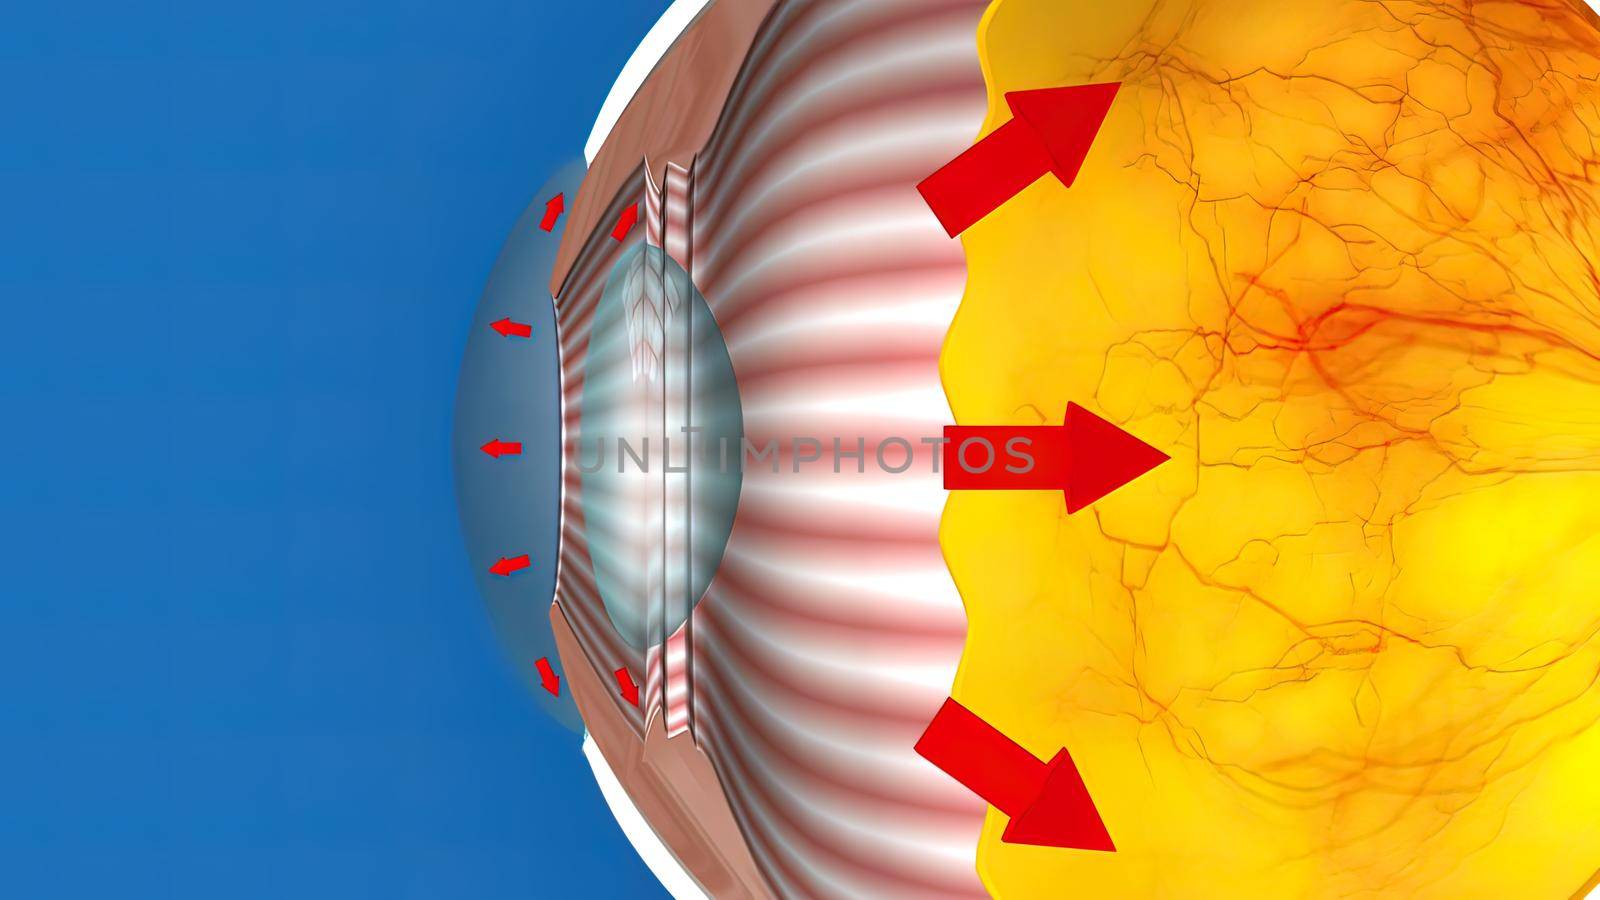 3D Medical Animated Normal Tension Glaucoma on Blue Background by creativepic